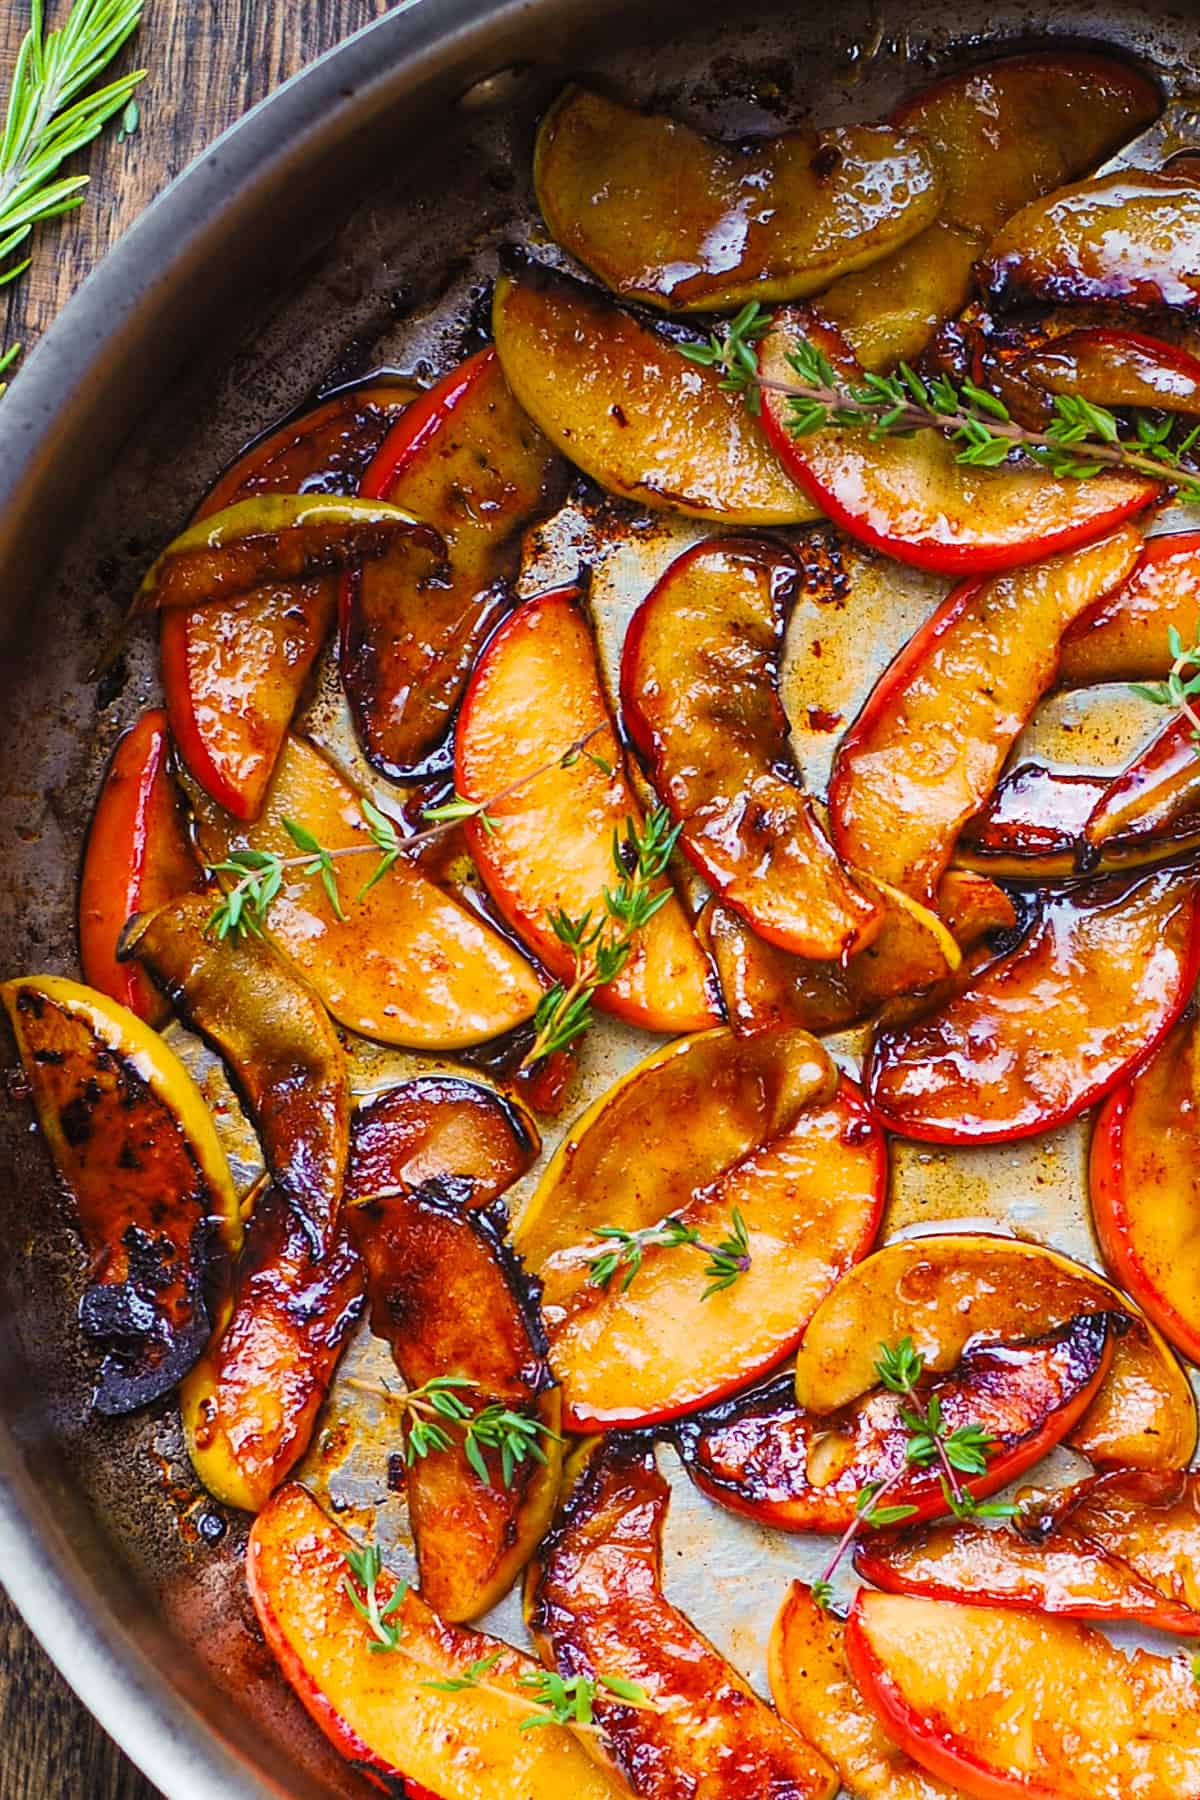 sautéed apples in a stainless steel pan